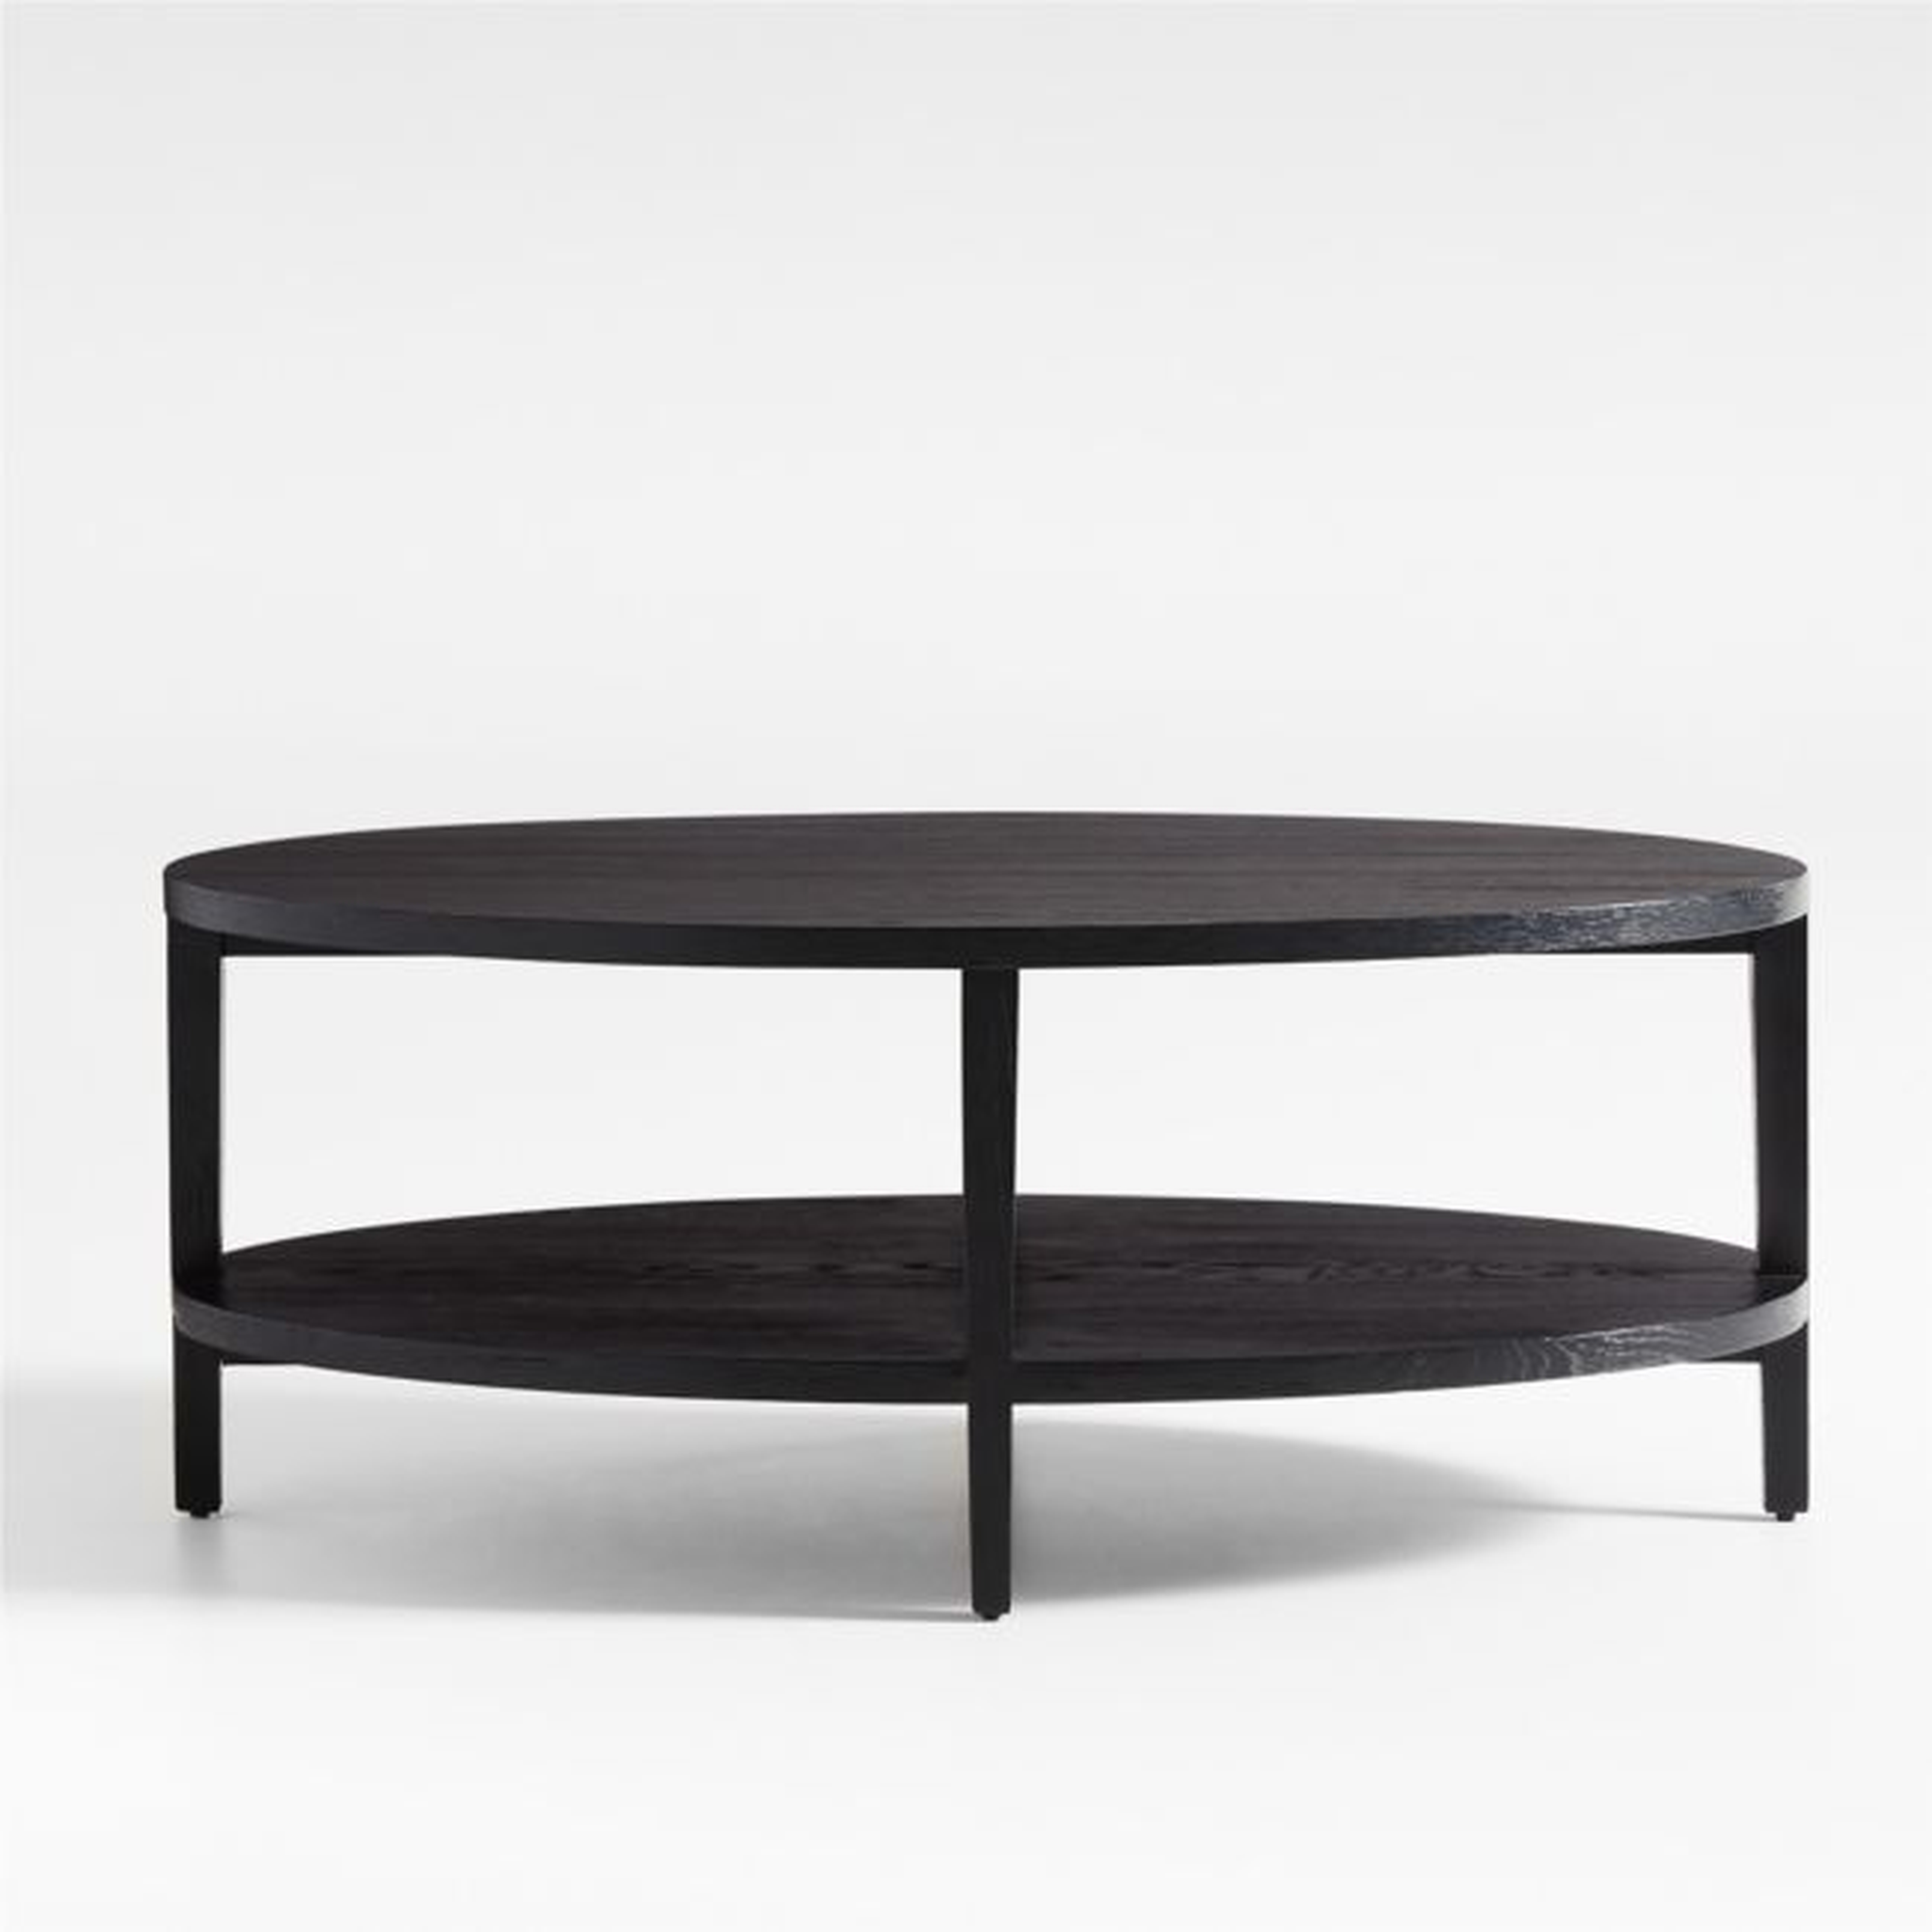 Clairemont Ebonized Oak Wood 48" Oval Coffee Table with Shelf - Crate and Barrel